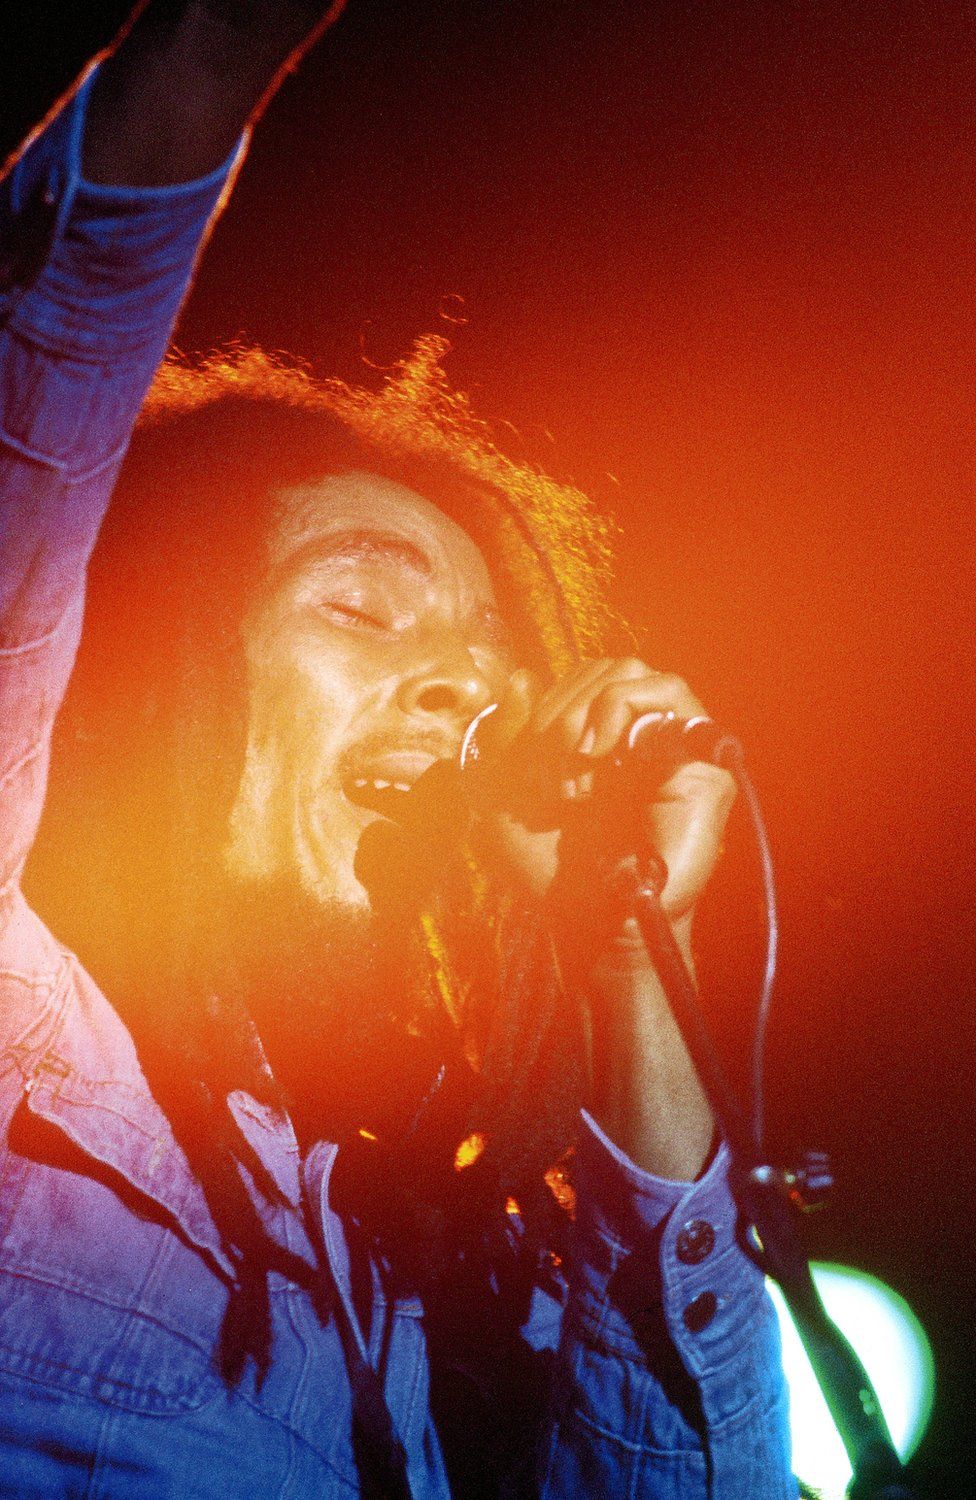 Bob Marley performing on stage in the US in 1979